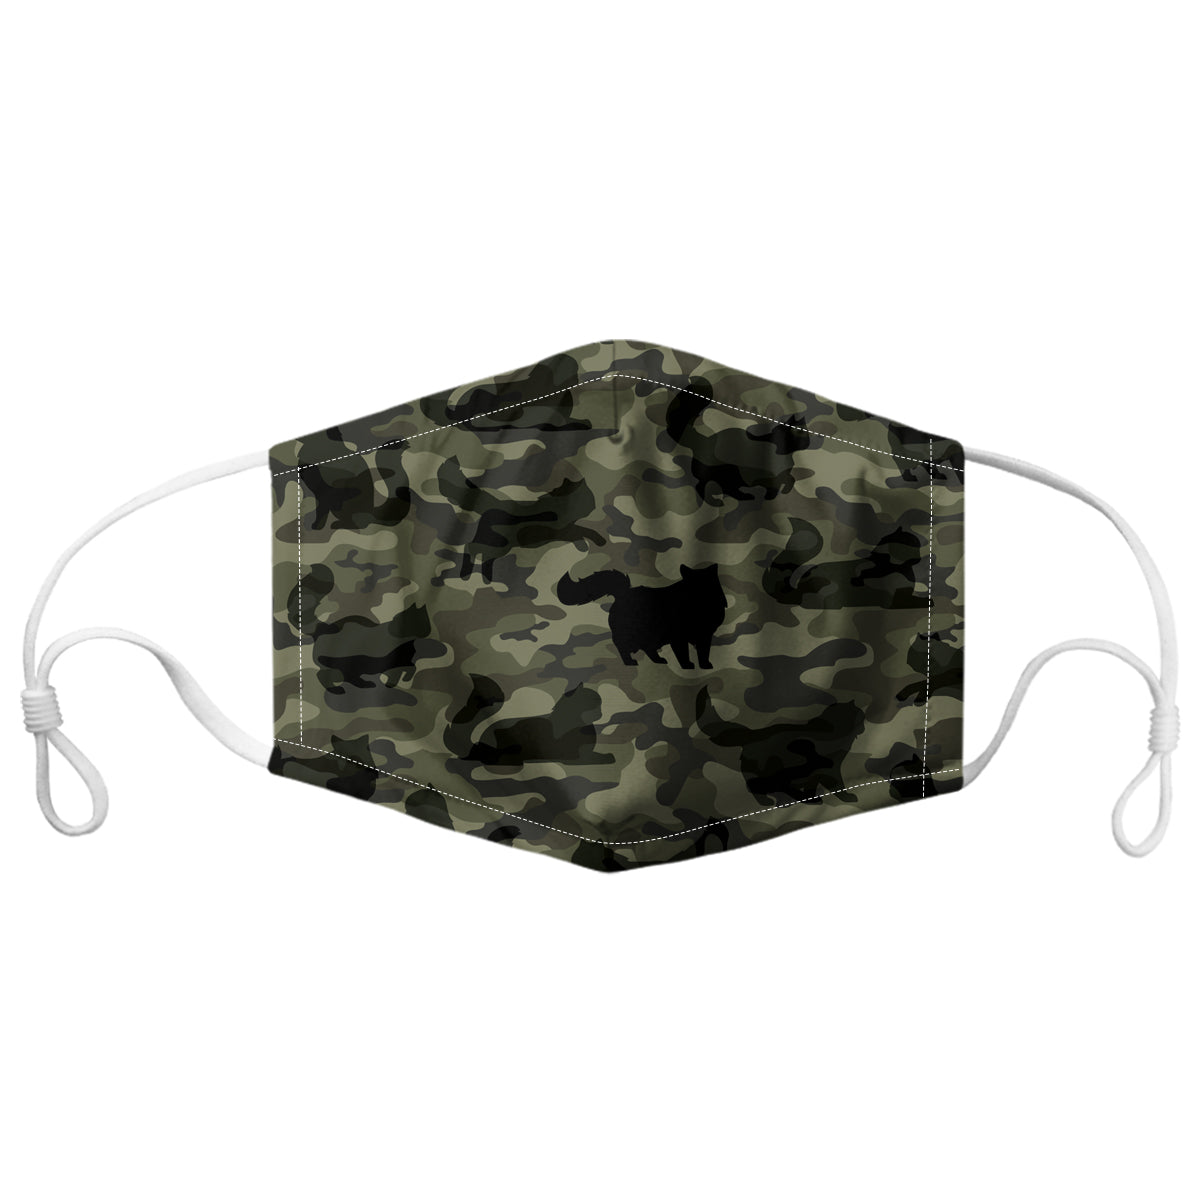 Masque F camouflage chat persan V1